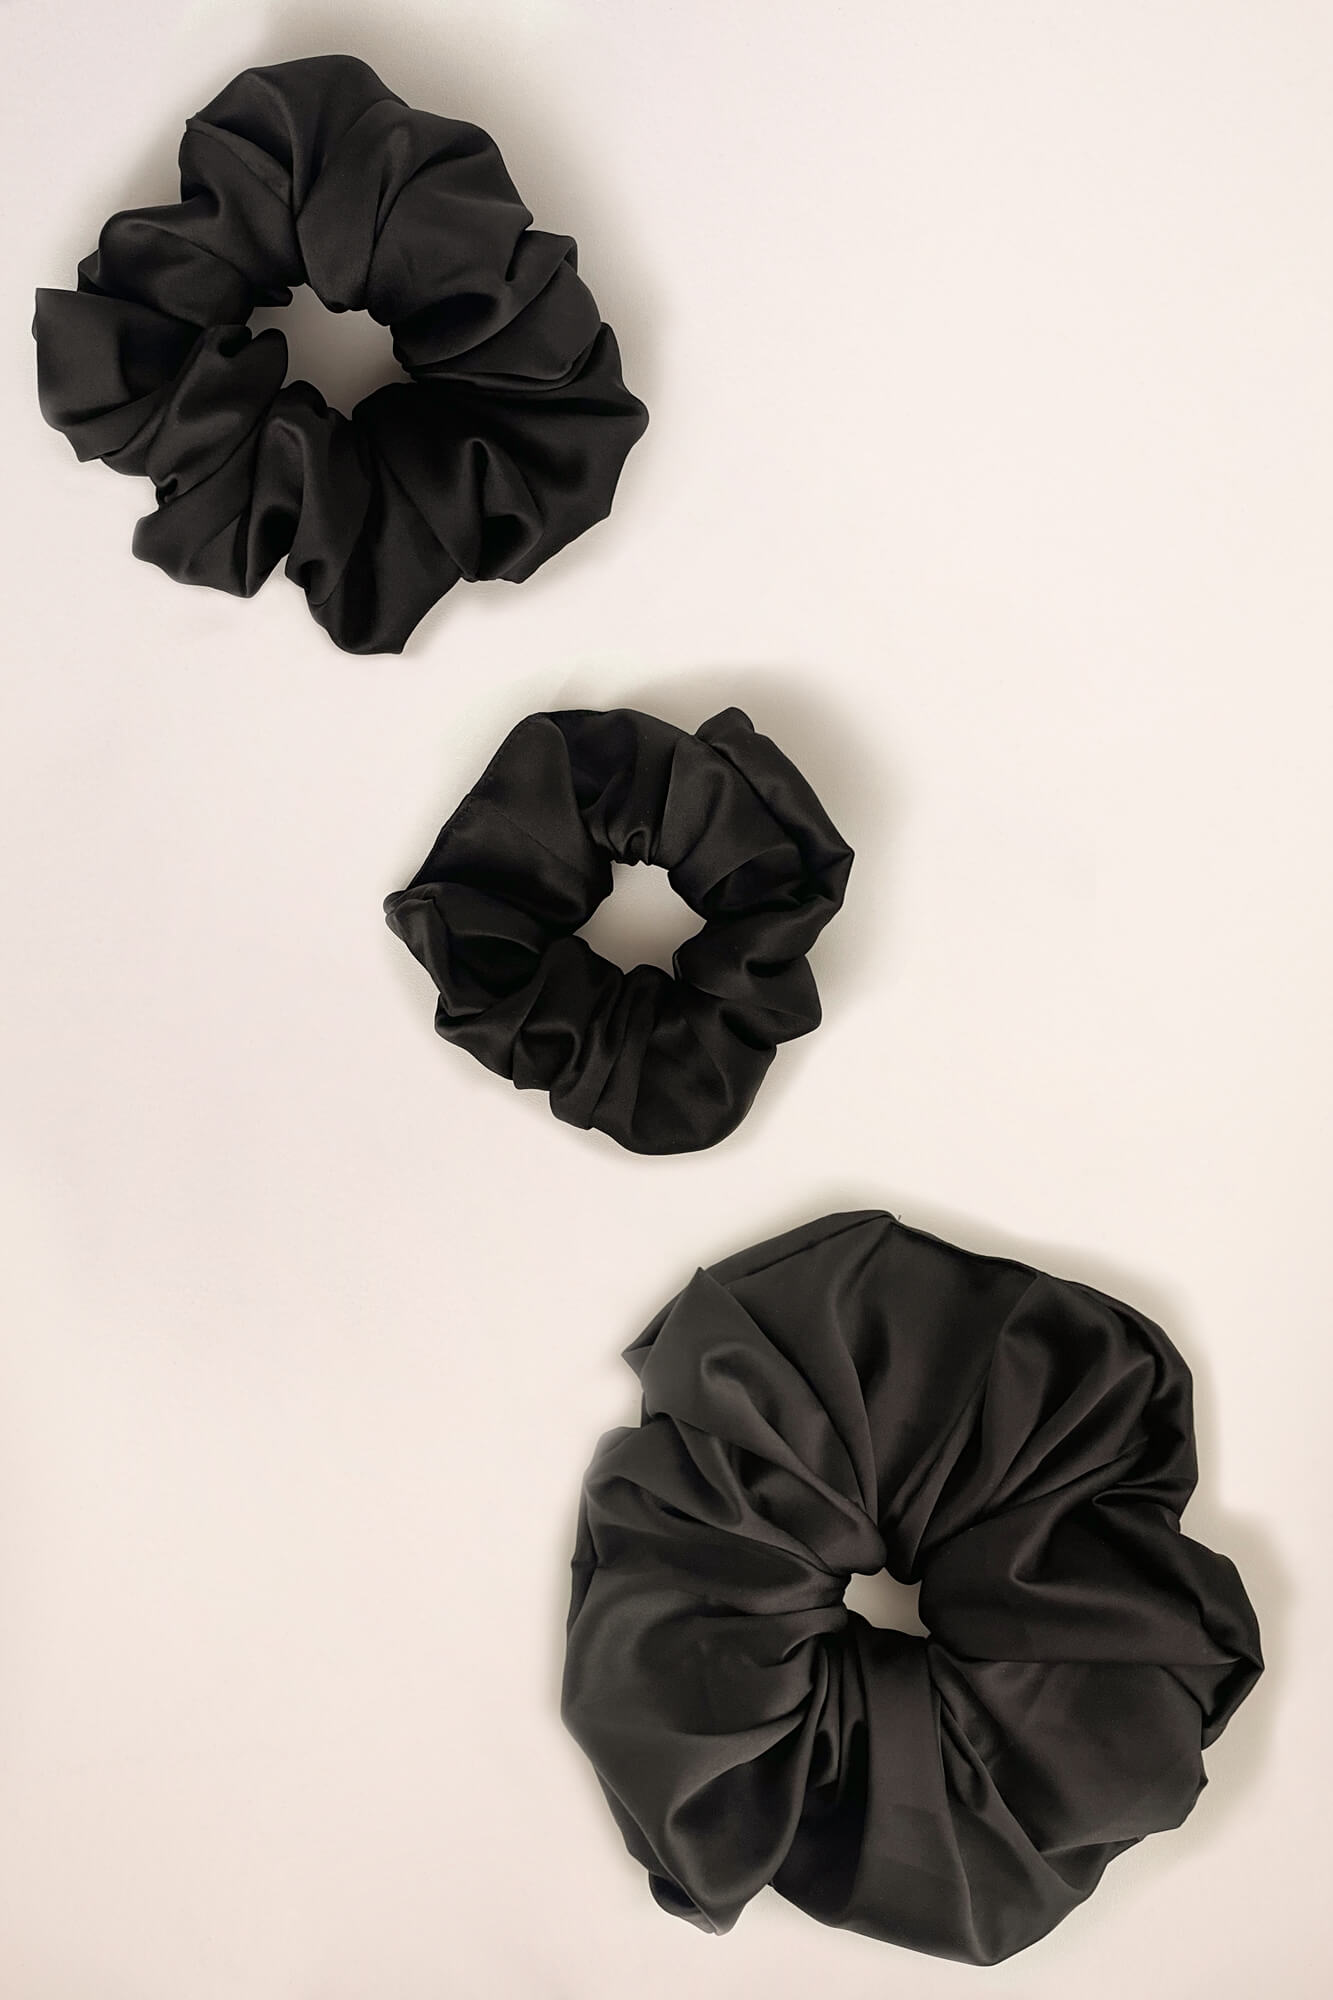 Silk Scrunchie Oh Girl image featured